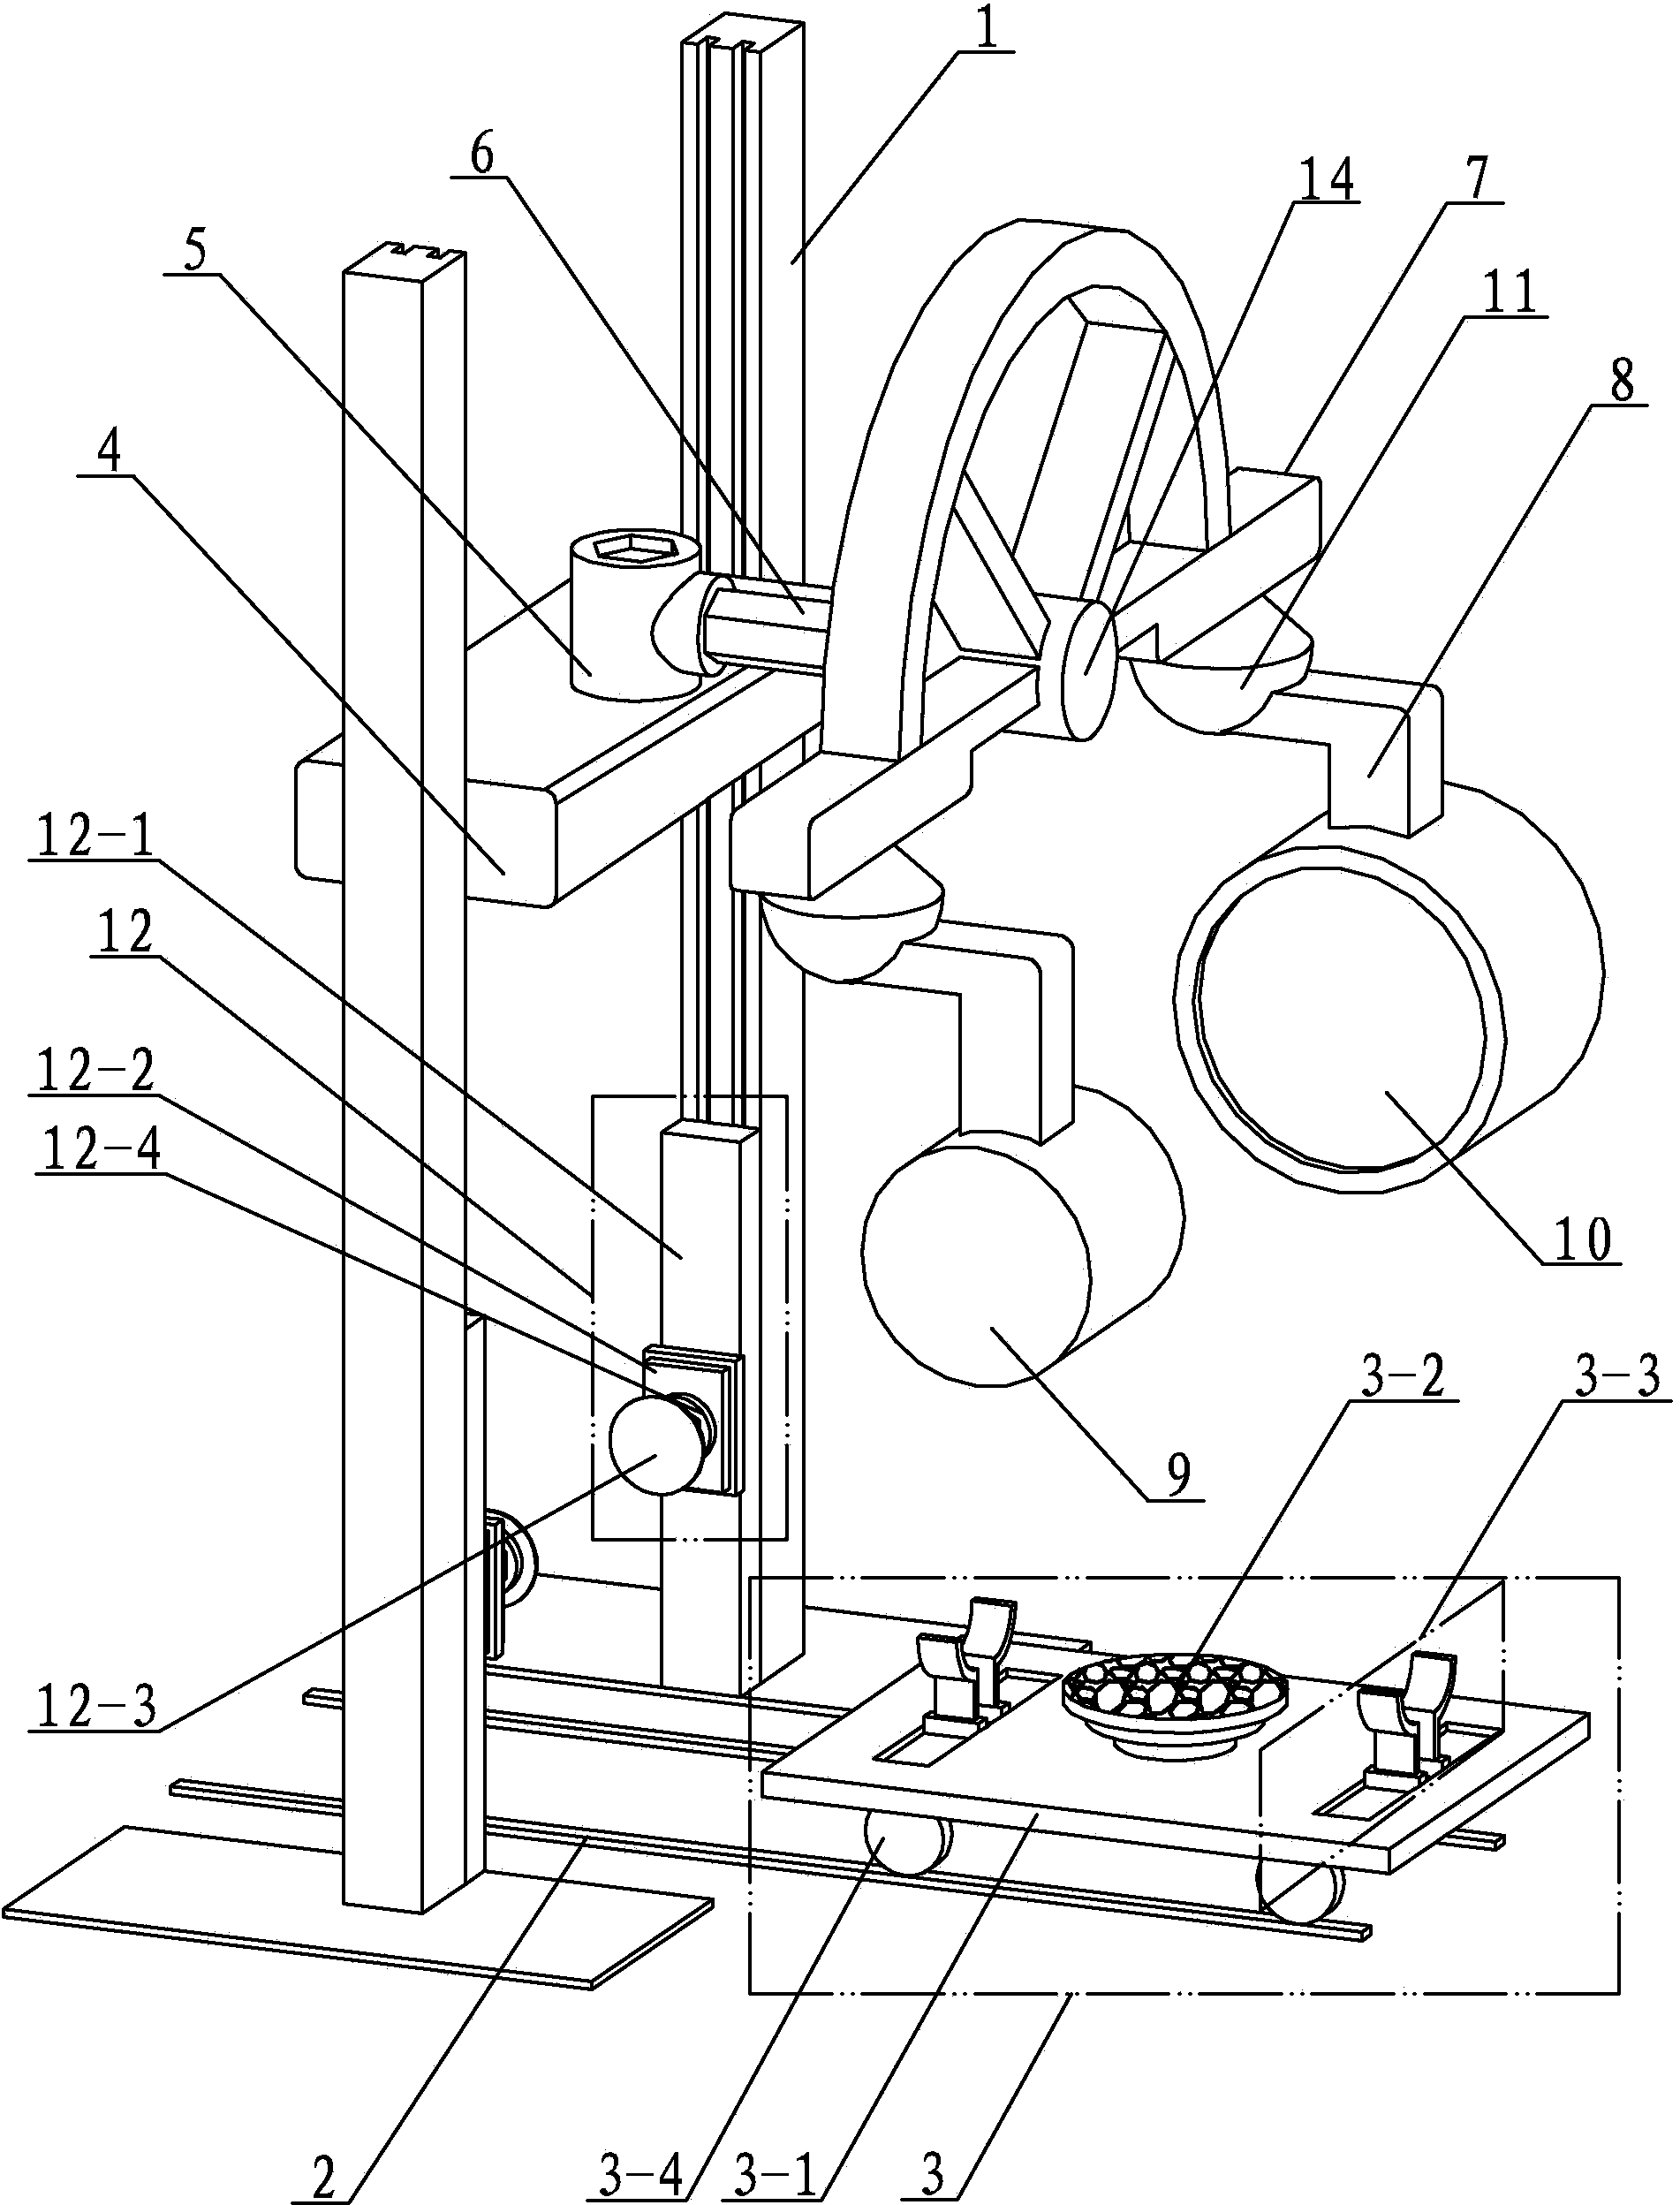 Wood nondestructive testing device capable of conducting imaging in real time at any angle